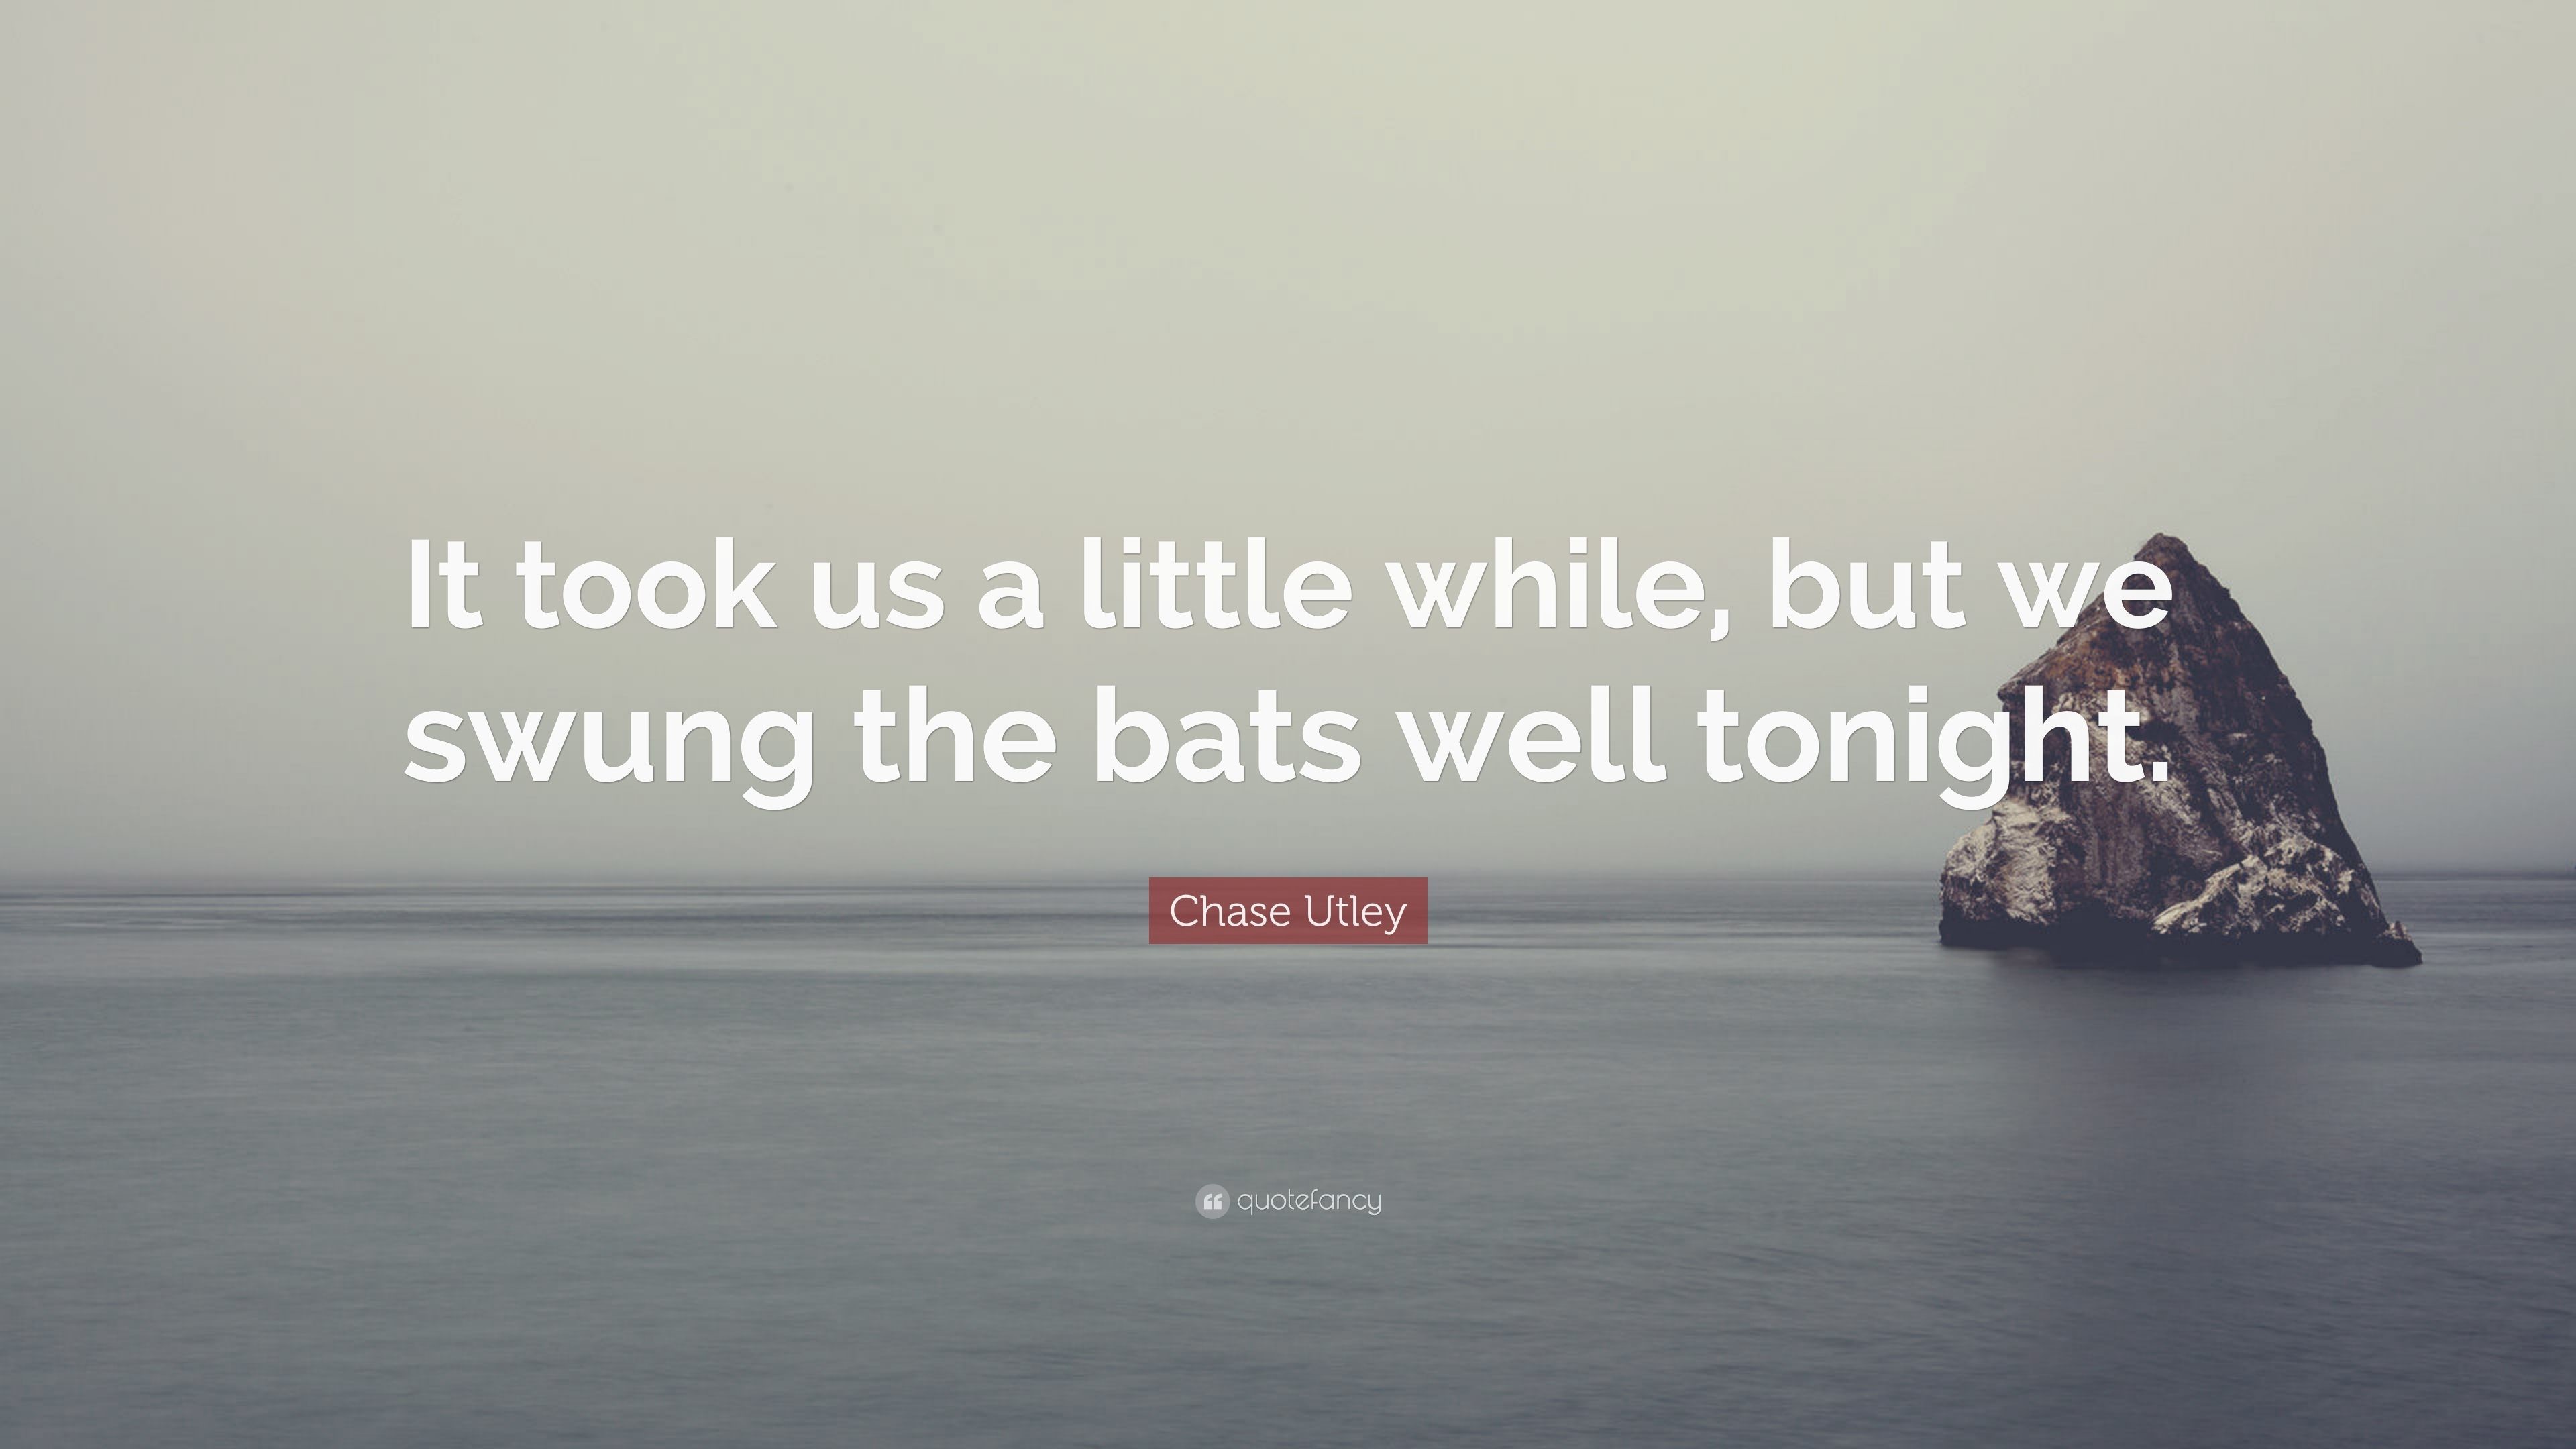 3840x2160 Chase Utley Quote: “It took us a little while, but we swung the